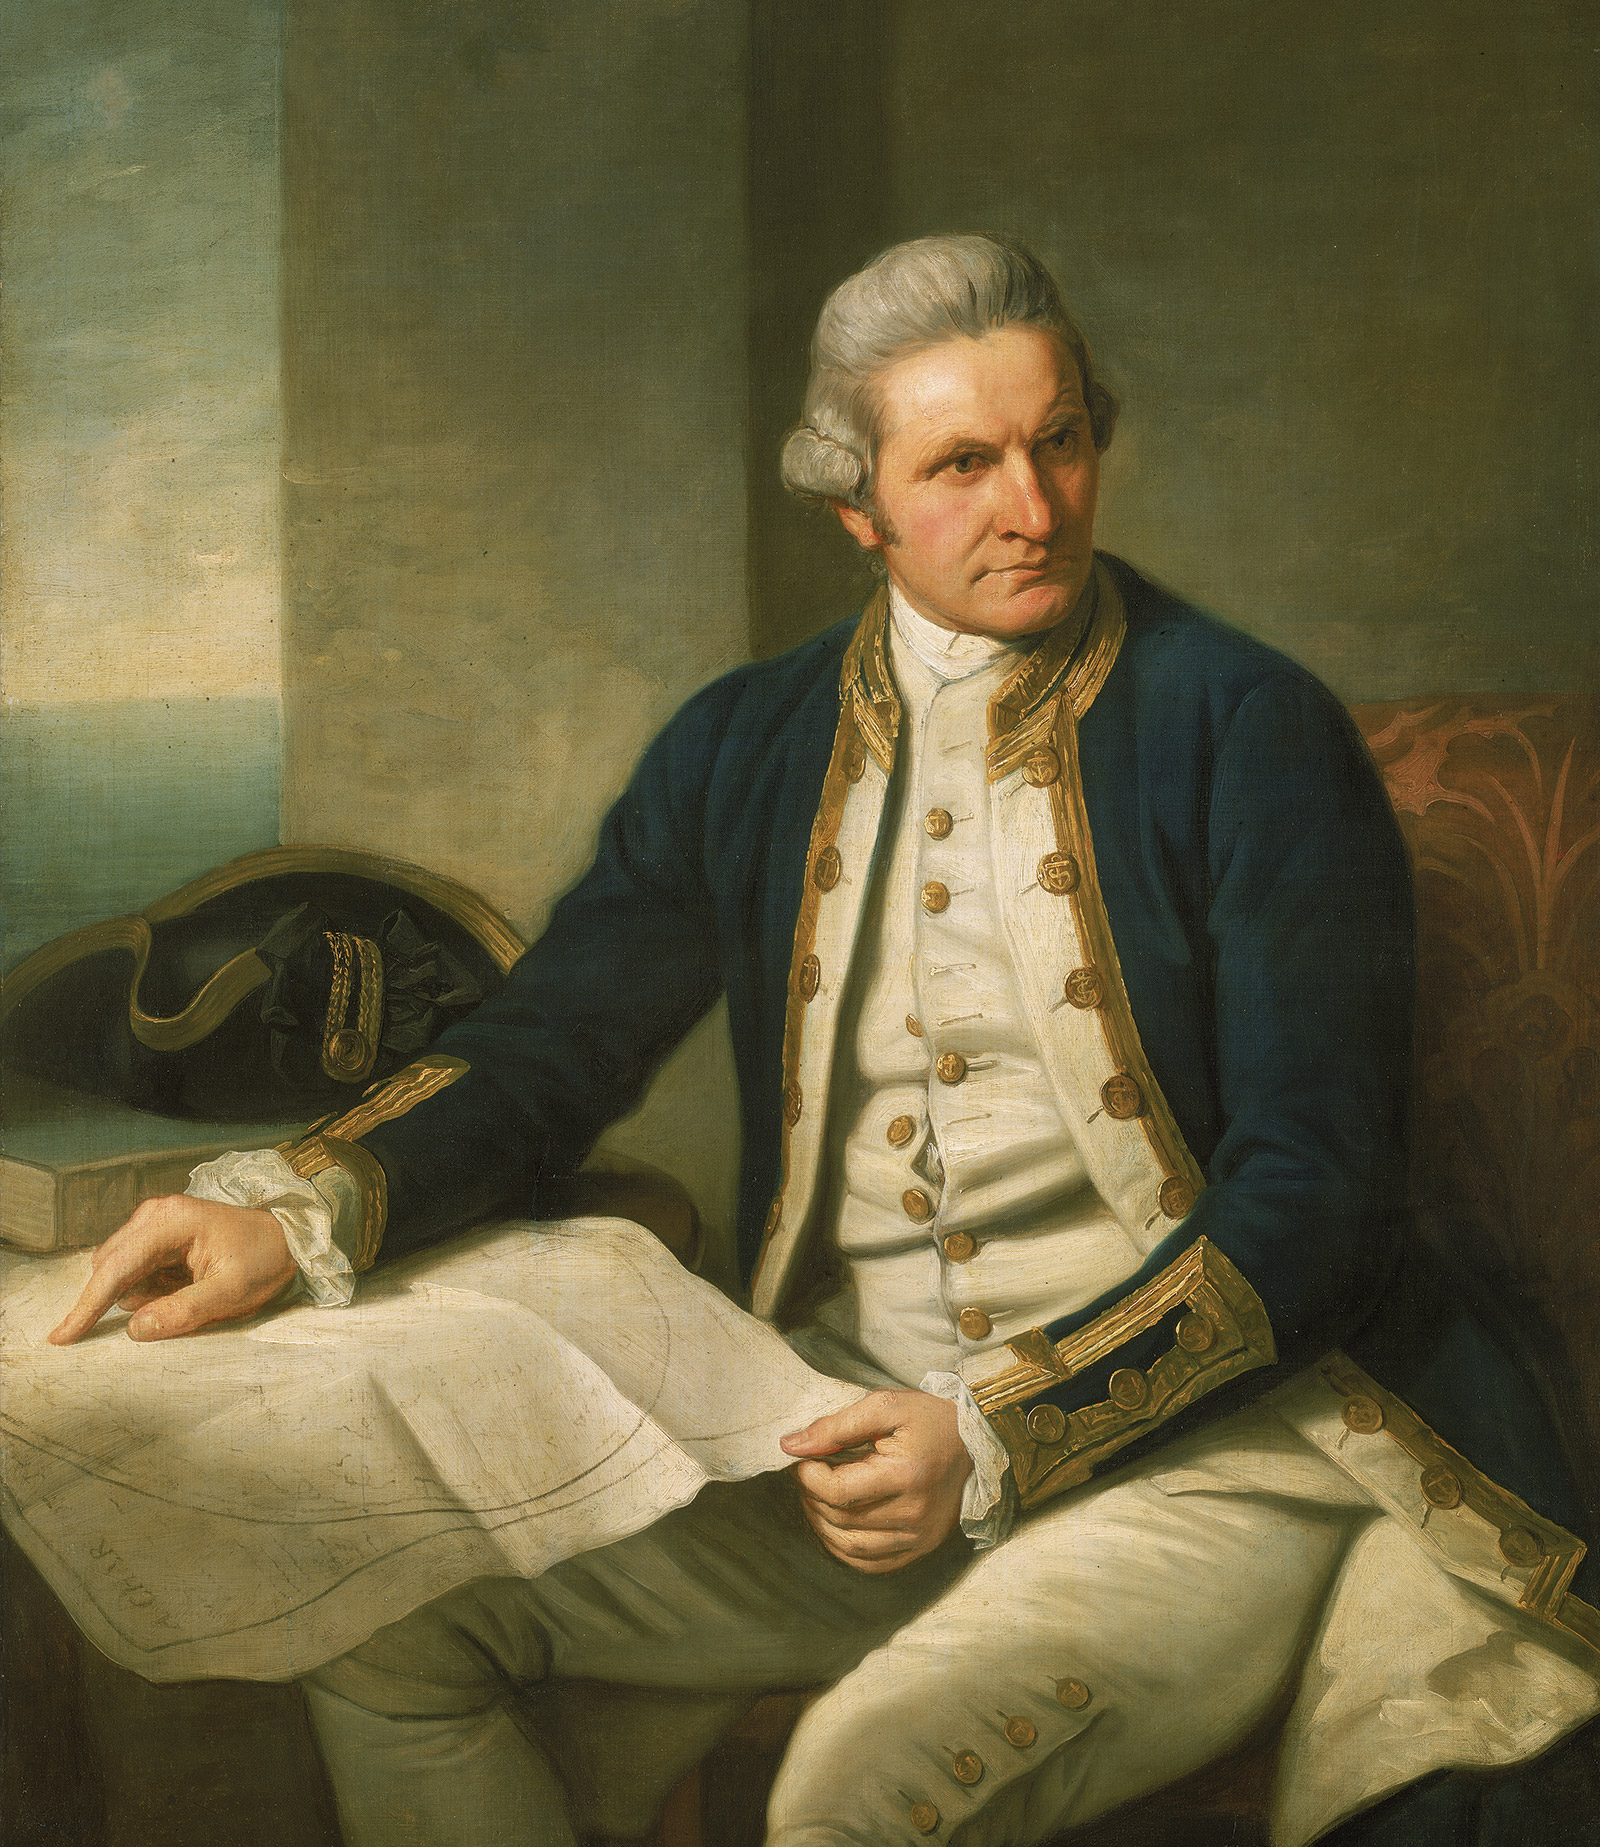 In the second painting by society portraitist Nathaniel Dance, Cook’s dominion is indicated with his capable index figure hovering over a map of territory that he has explored and chartered himself, celebrating his own capacity rather than power conferred by status and birth.